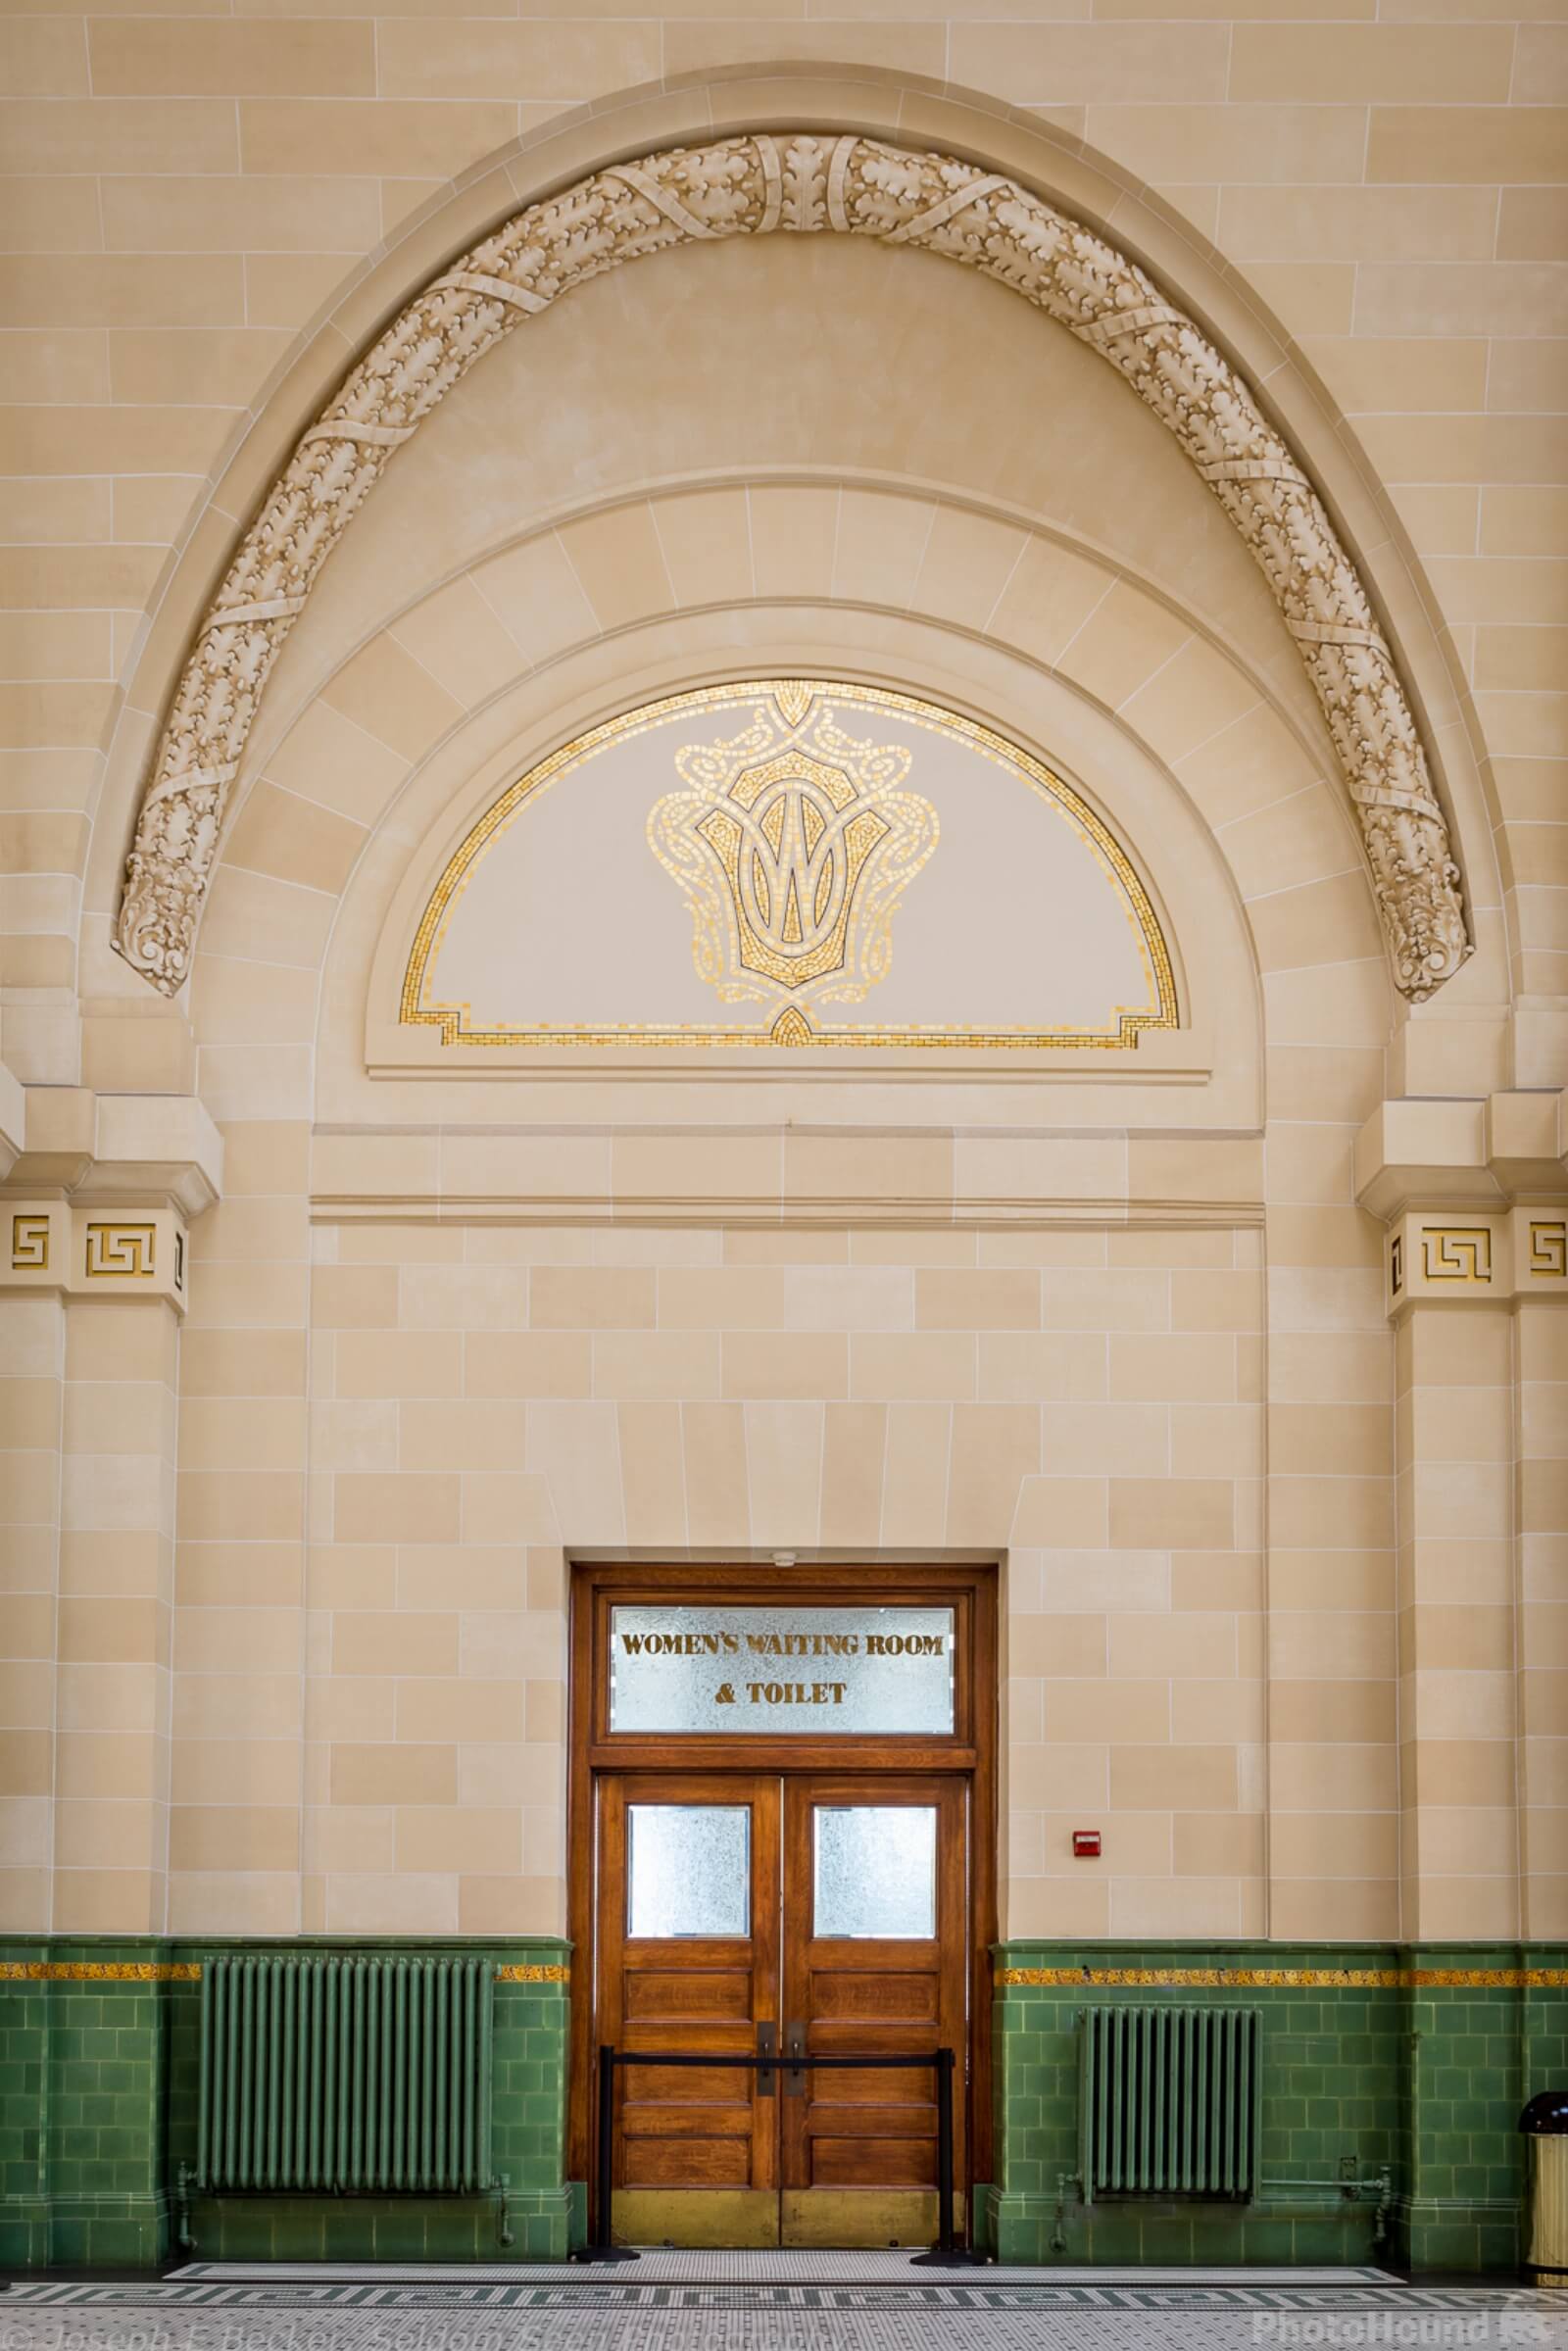 Image of Union Station - Interior by Joe Becker